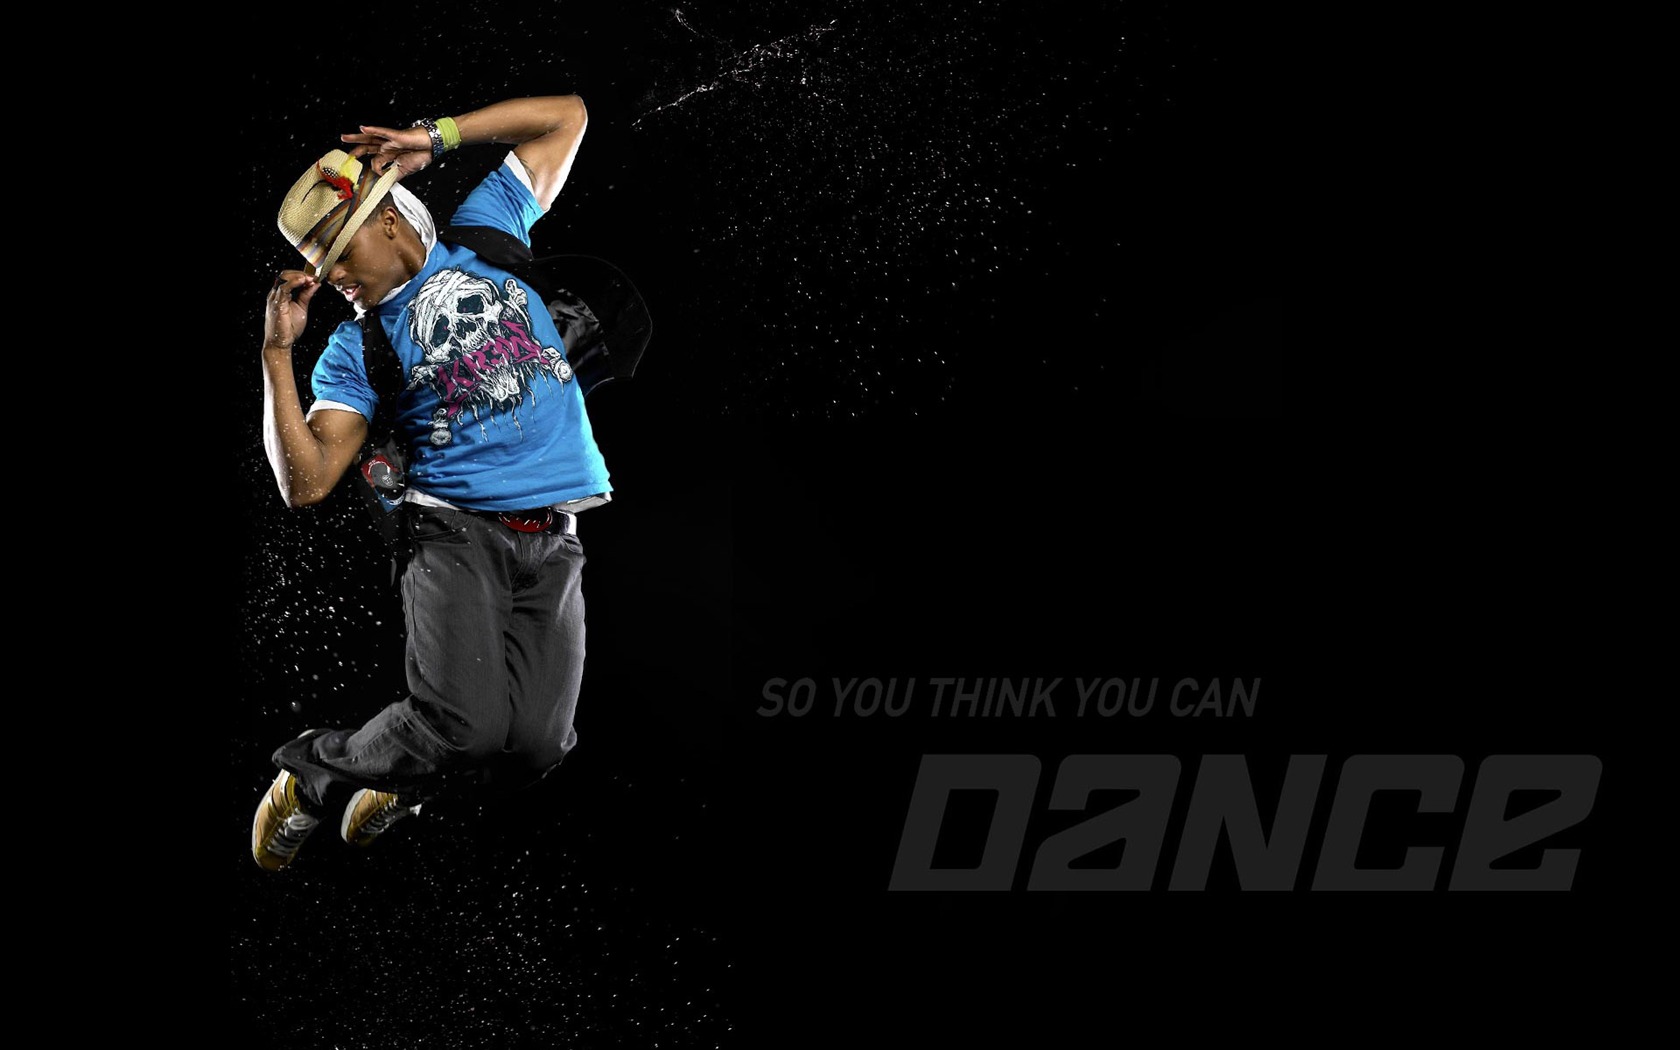 So You Think You Can Dance wallpaper (1) #20 - 1680x1050